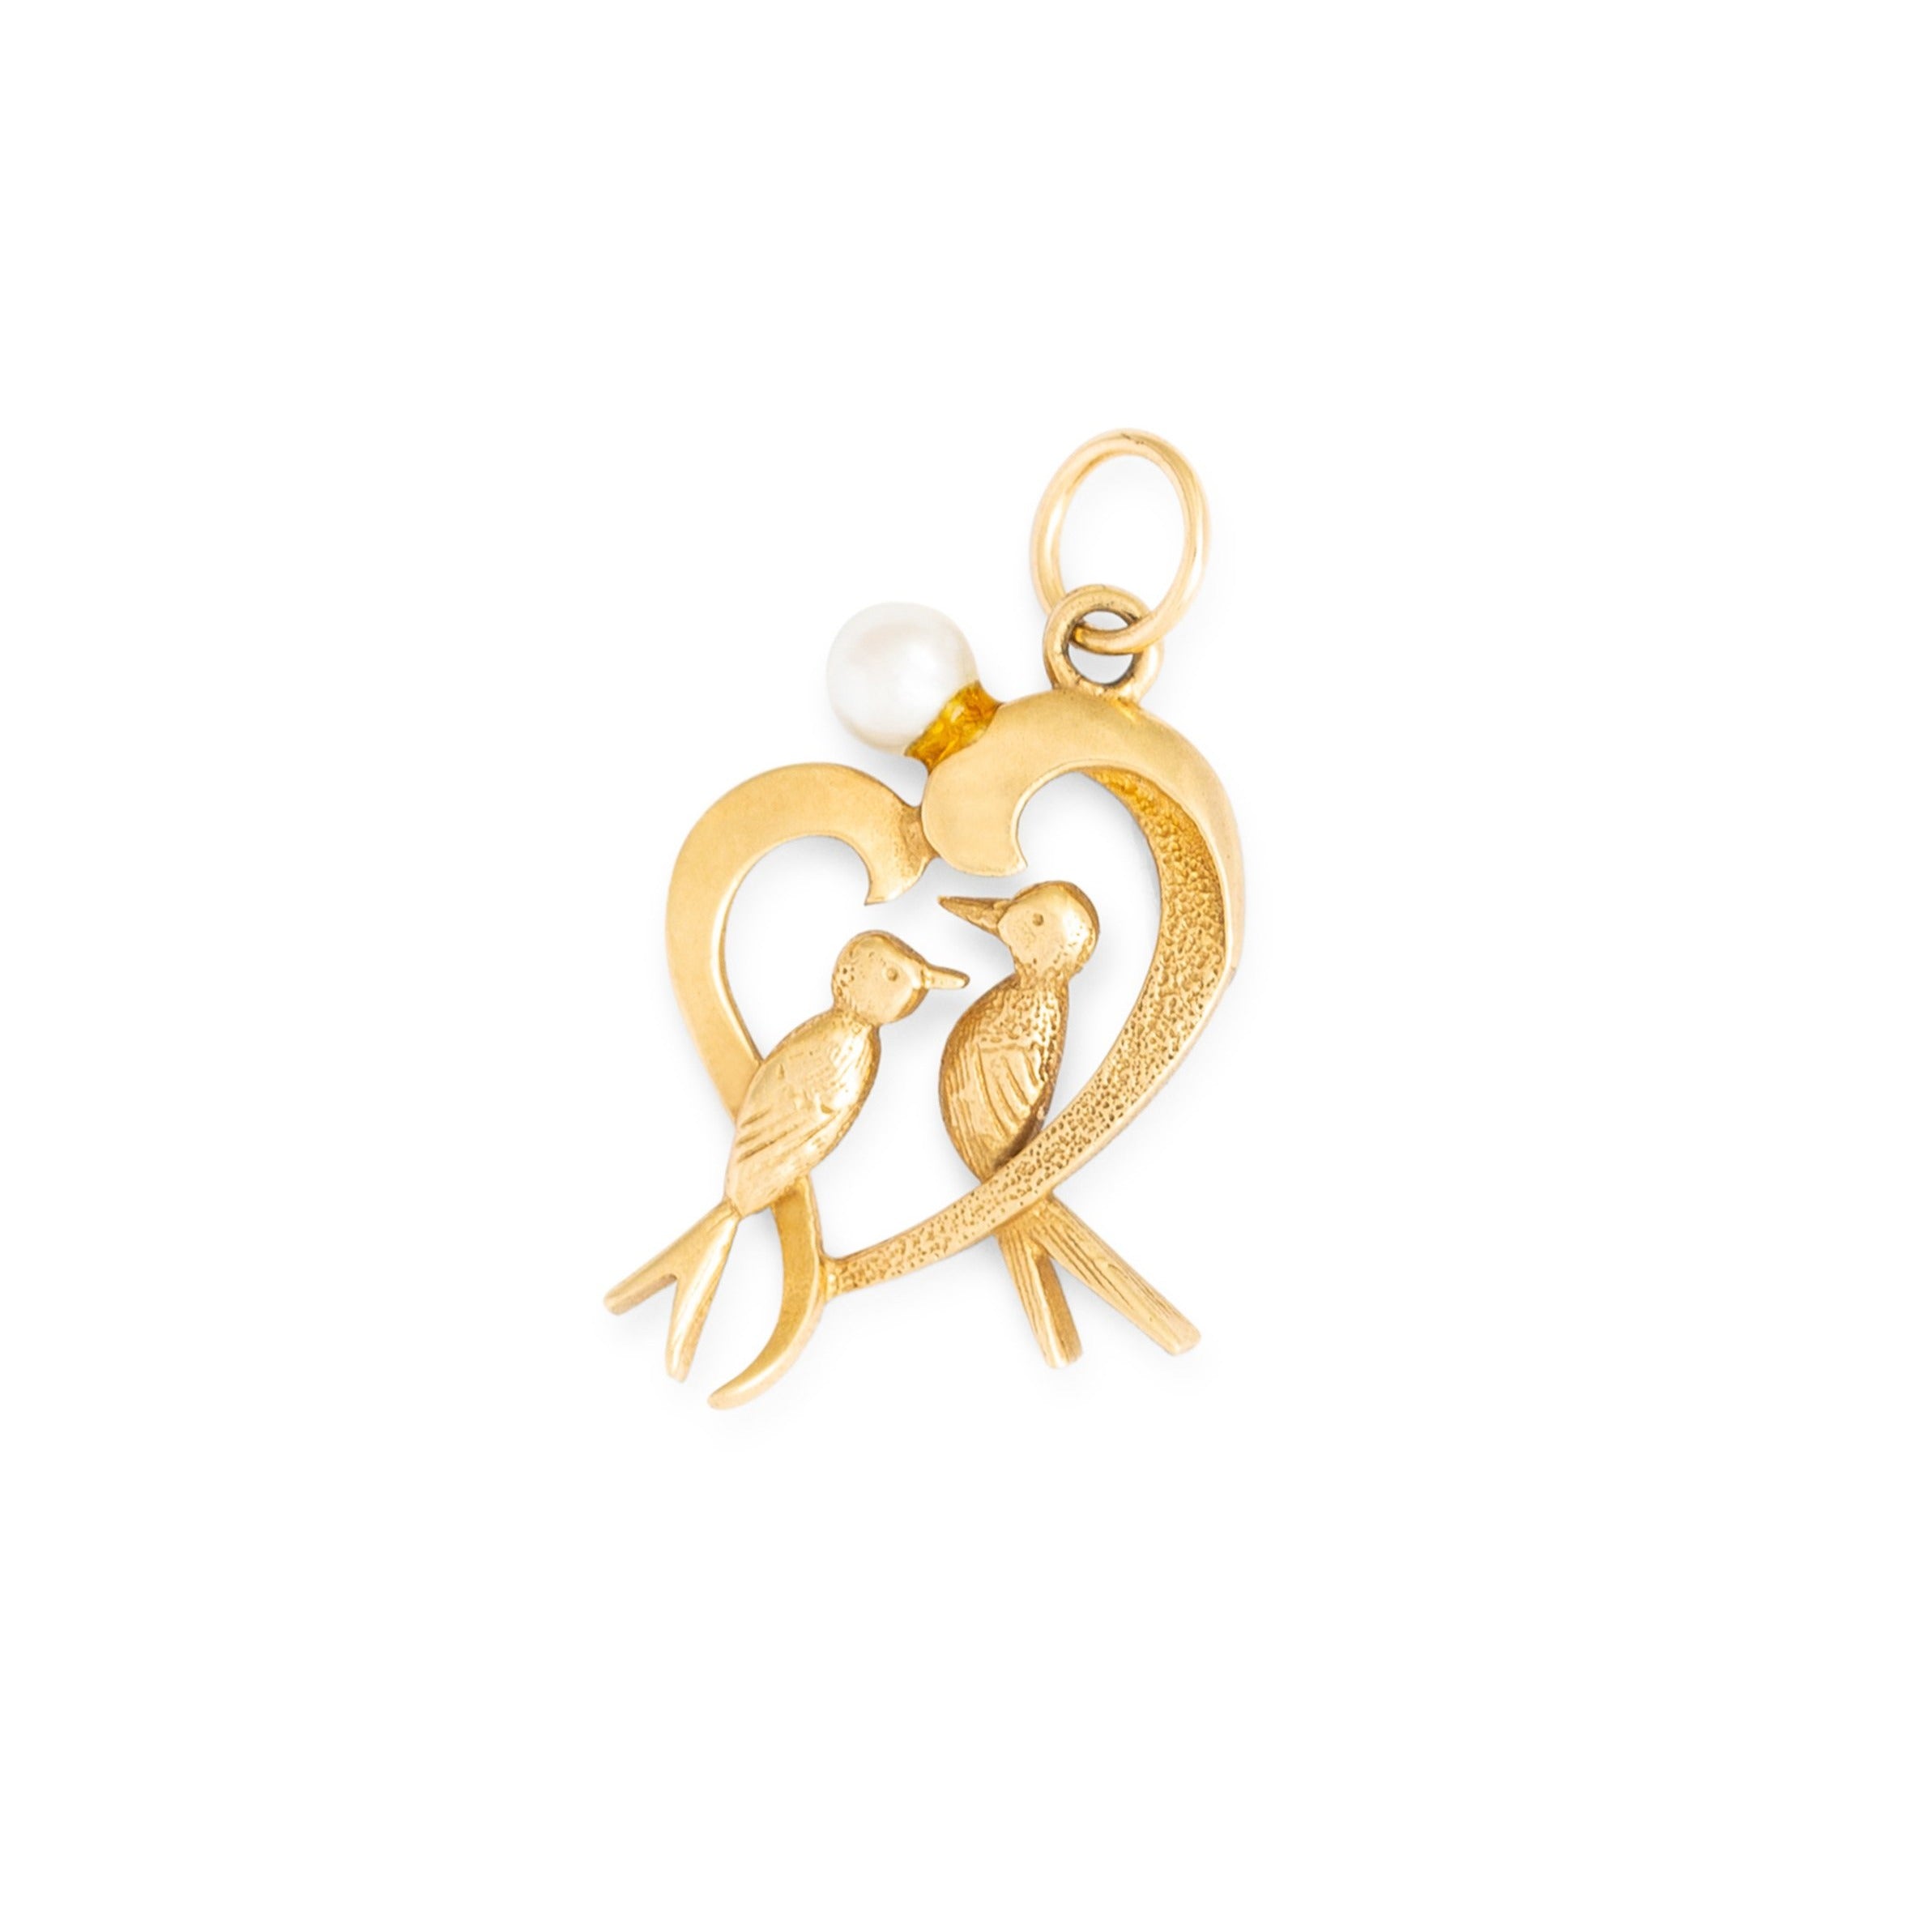 Love Birds 12k Gold and Pearl Heart Charm